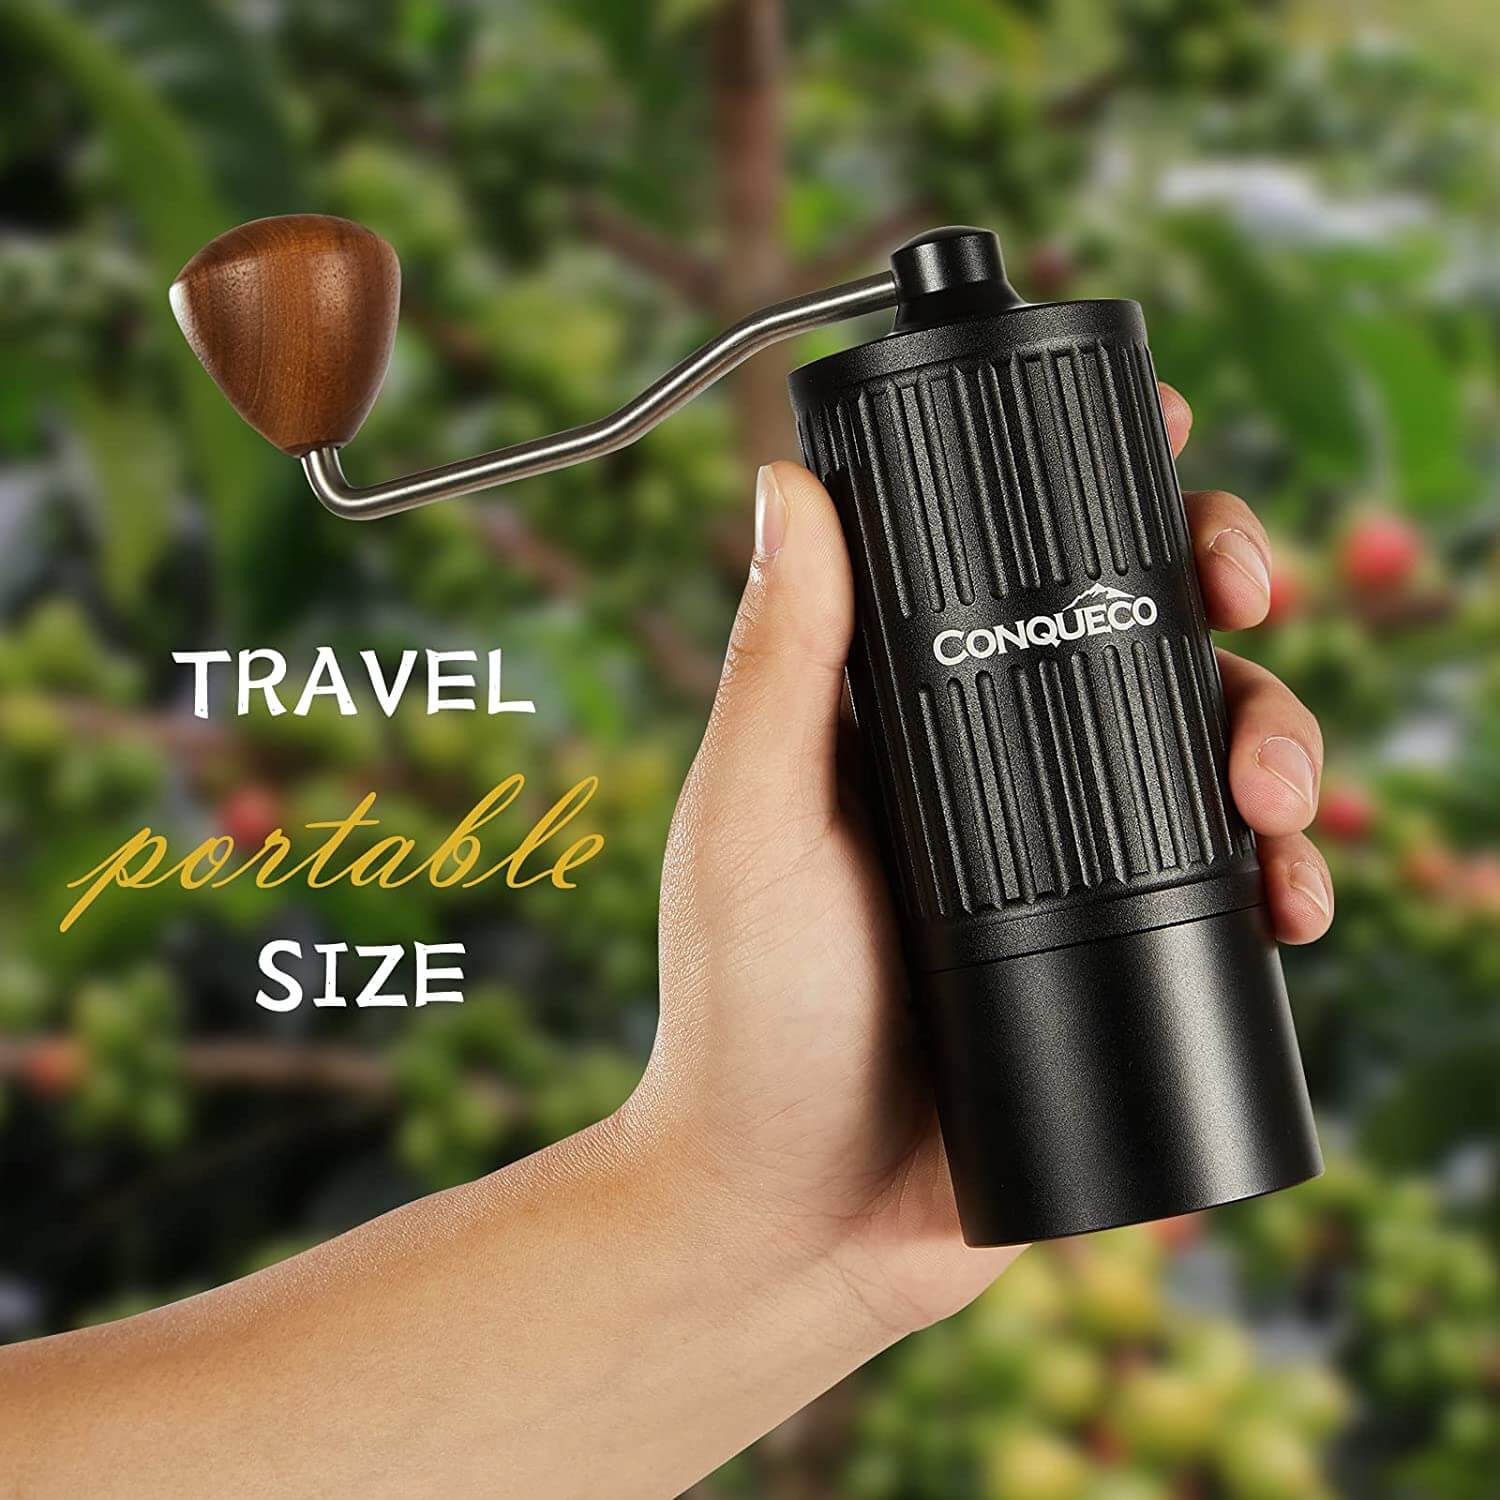 SPAOTREM Electric Coffee Grinders with Ceramic Cone, Mini Coffee Bean  Grinder, Adjustable Coarseness, Portable Rechargeable Small Electric  Espresso